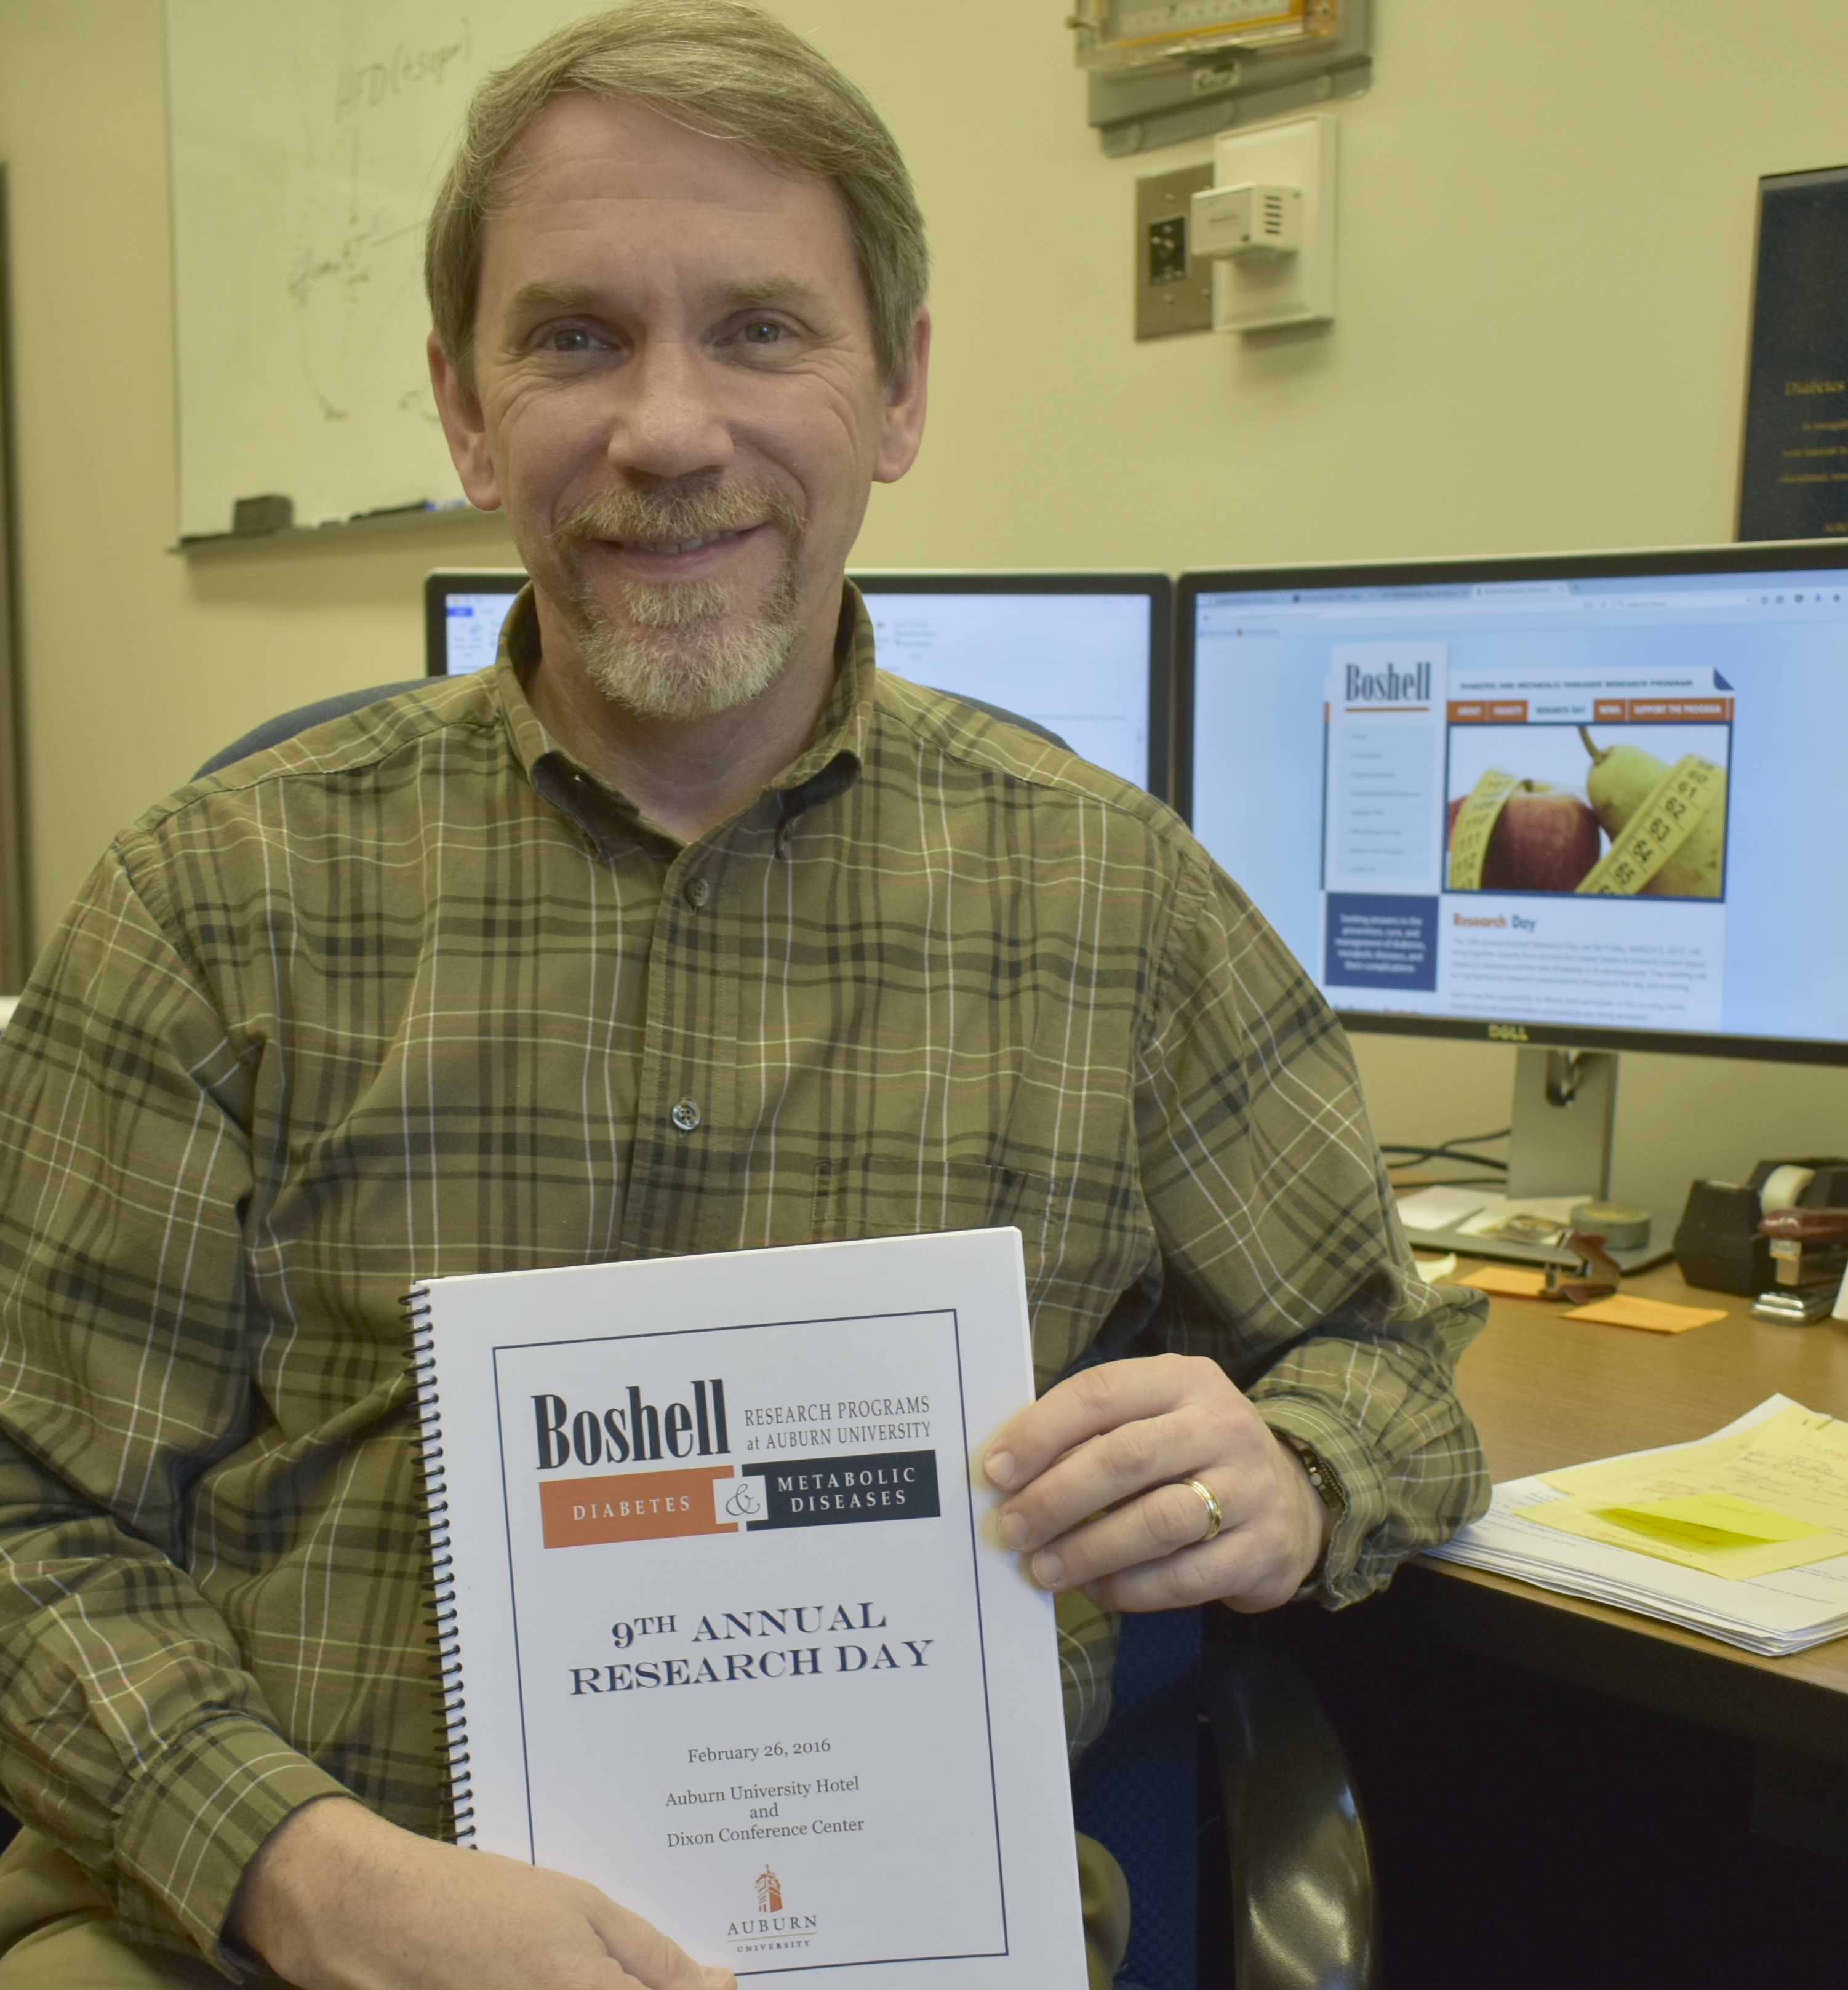 Professor Robert Judd, chair of Auburn’s Boshell Diabetes and Metabolic Diseases Research Program, and fellow researchers will host the 10th annual Boshell Research Day March 3 at The Hotel at Auburn University and Dixon Conference Center.